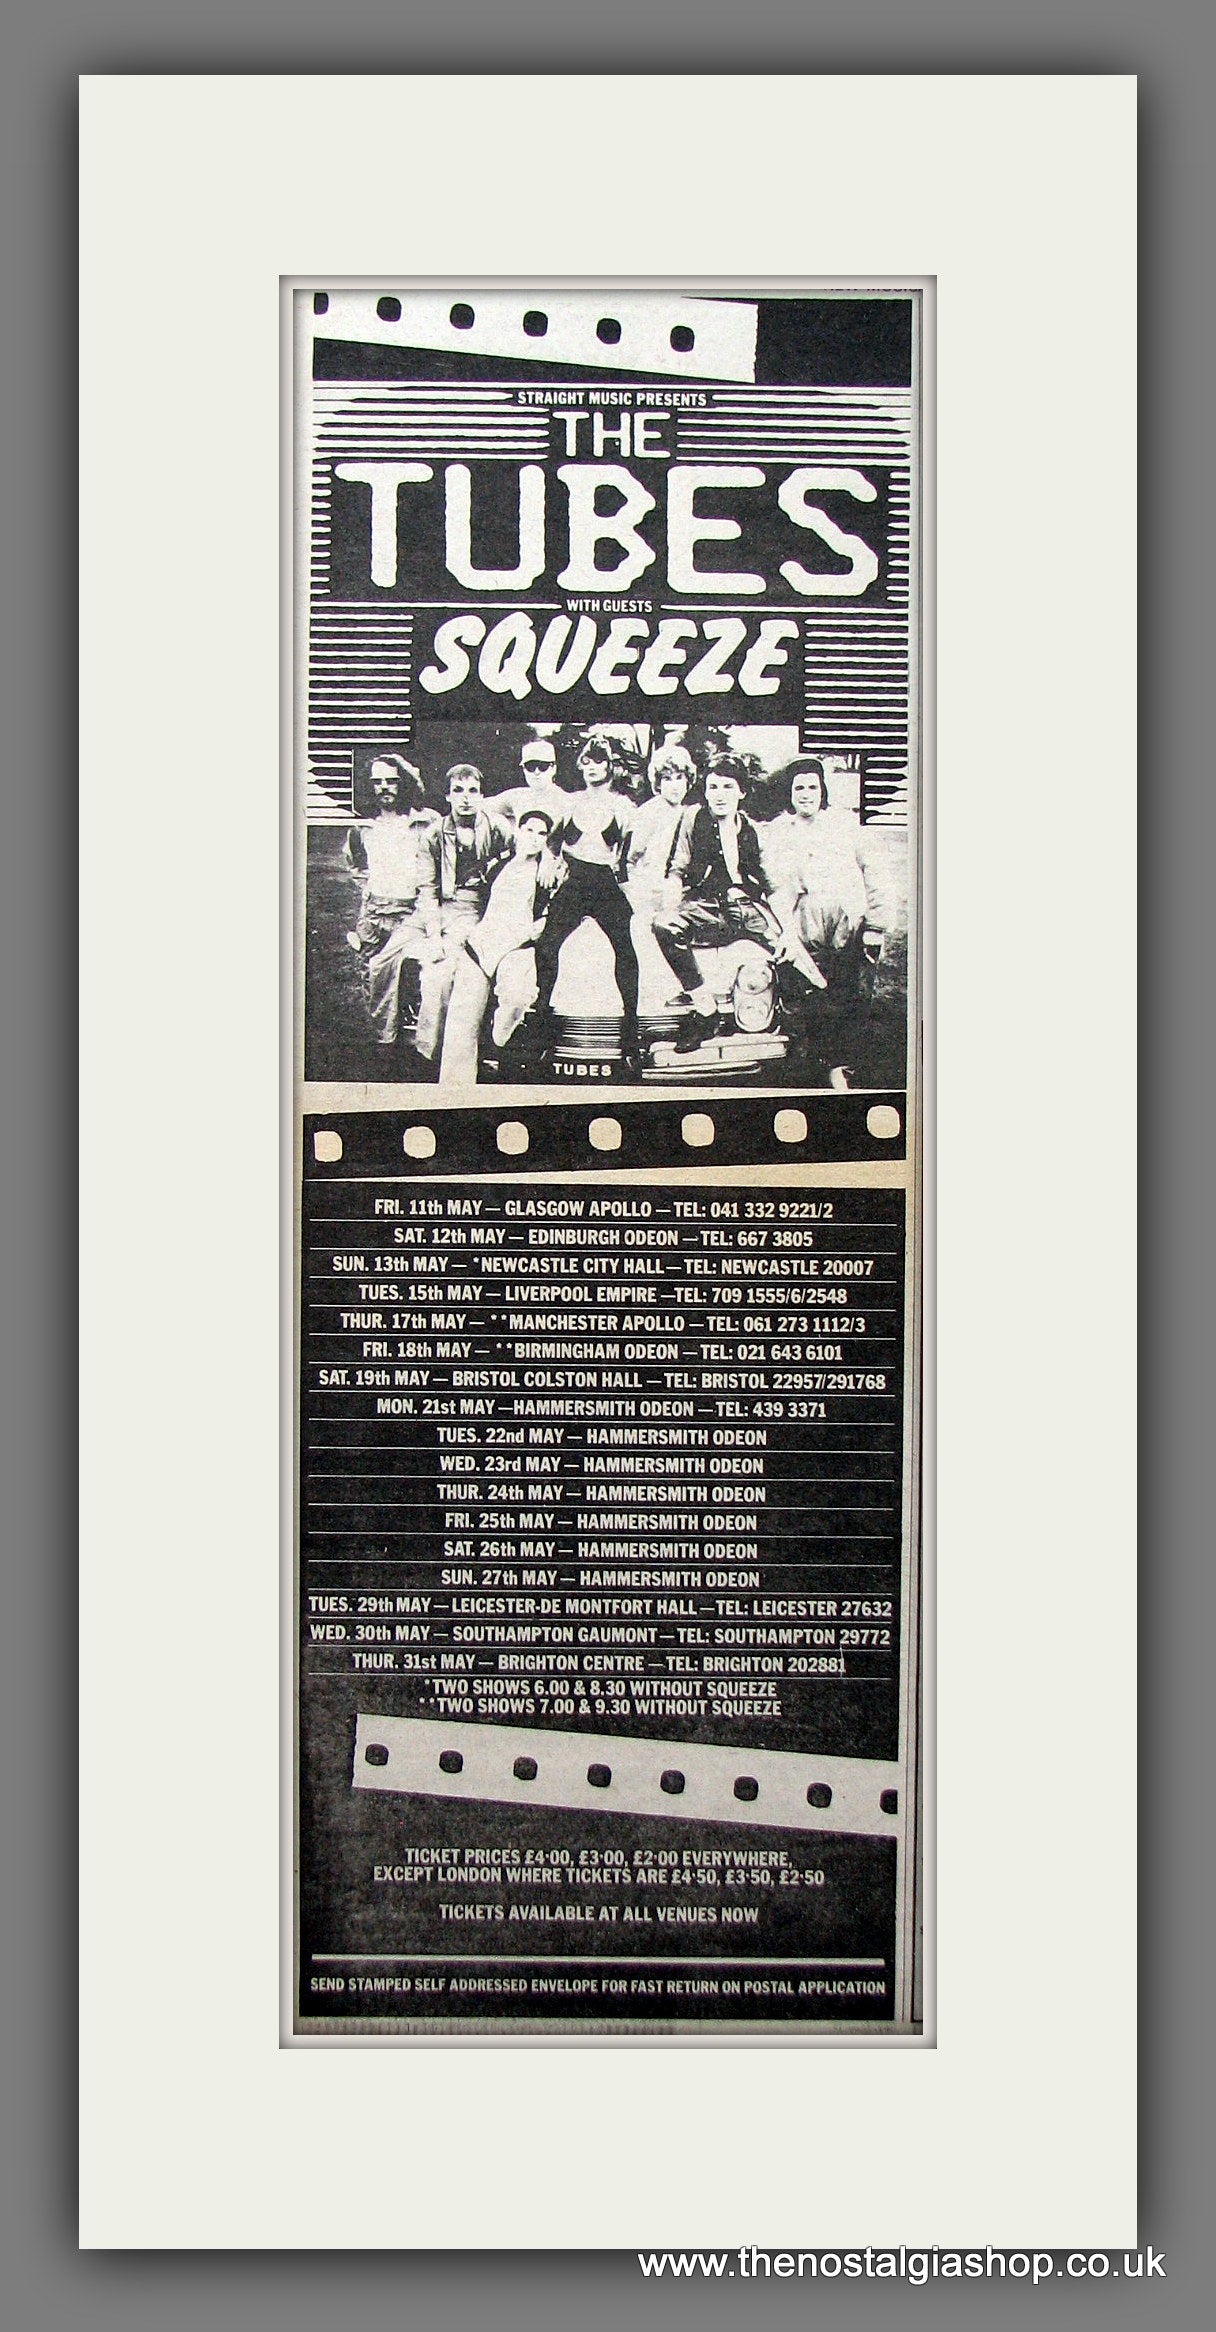 Tubes (The) UK Tour with Squeeze. Original Advert 1979 (ref AD200167)